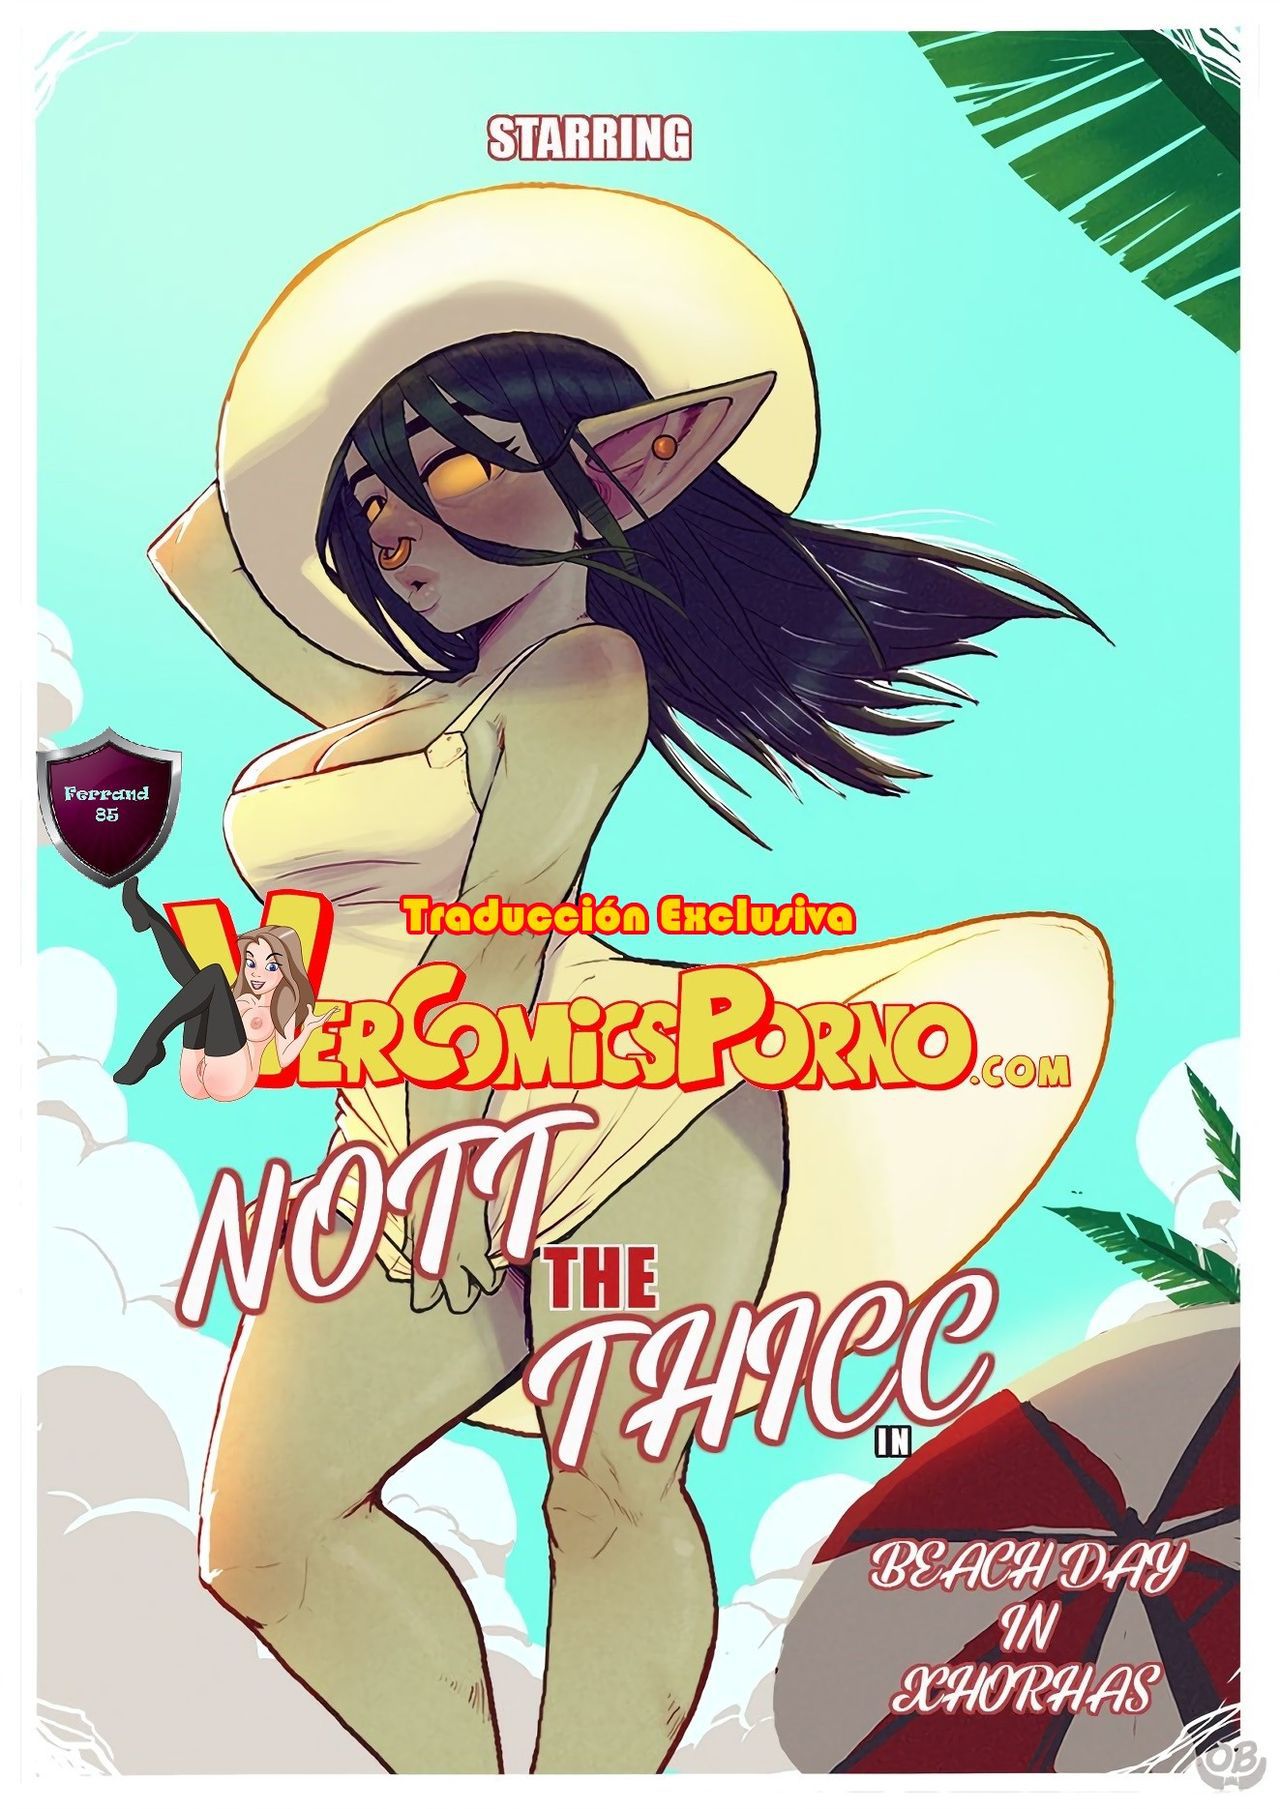 [Orcbarbies] Beach Day in Xhorhas [Ongoing] [Spanish] 1